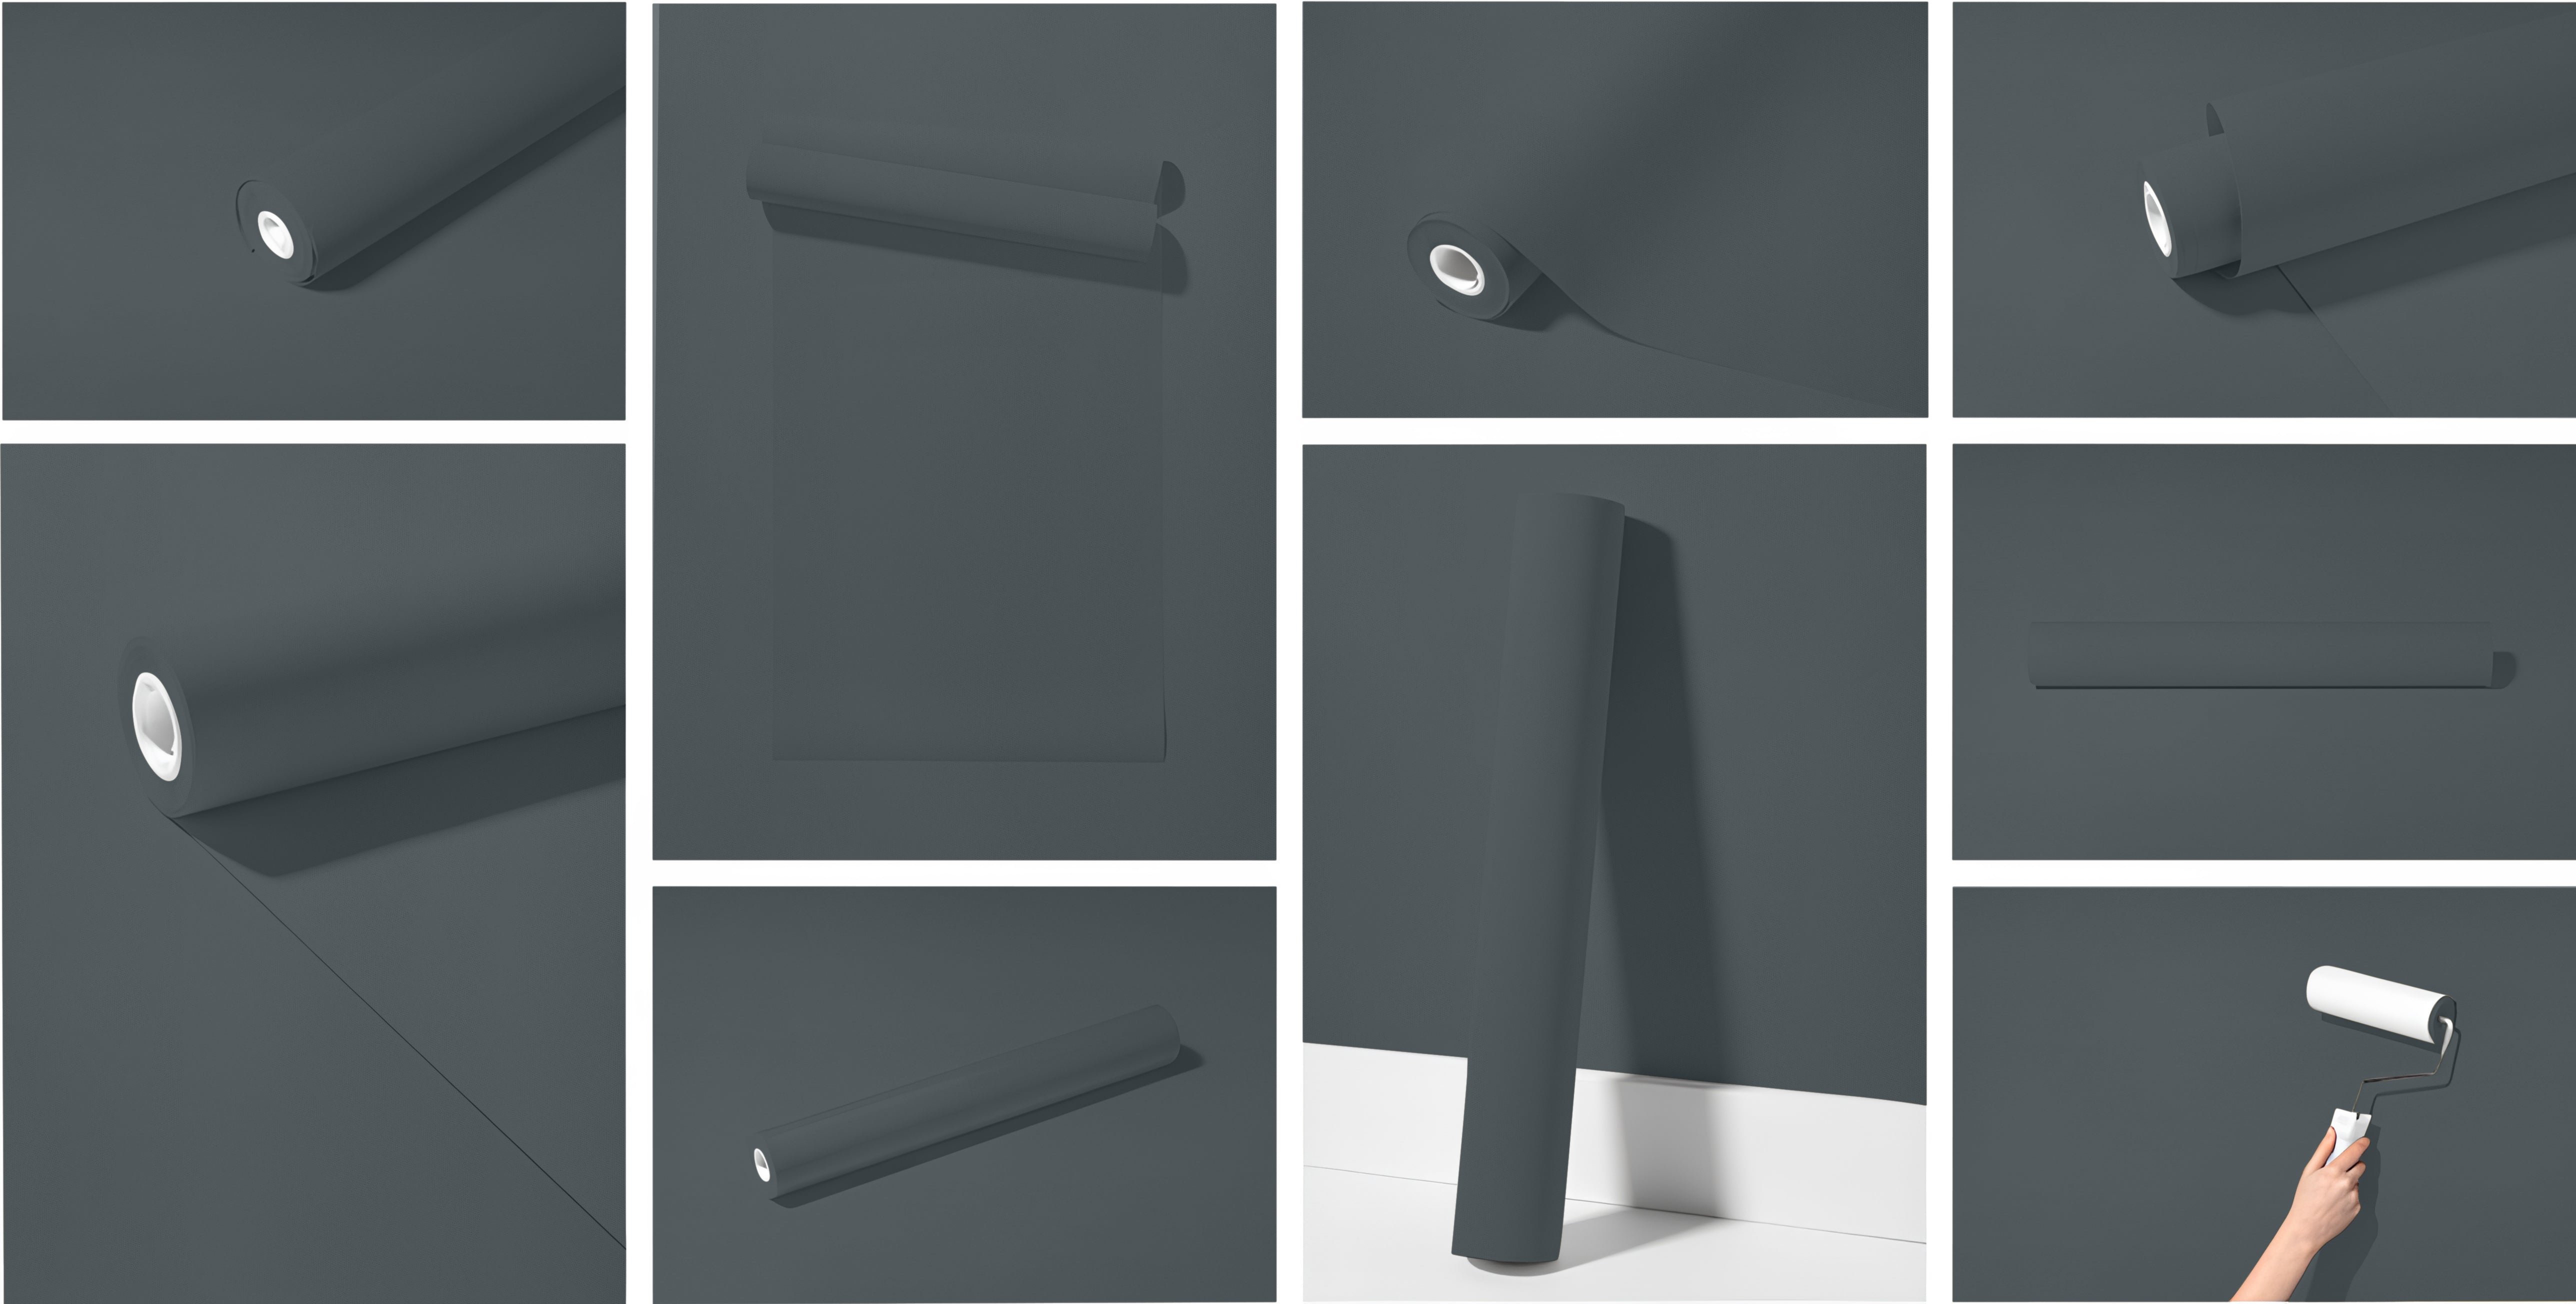 Peel & Stick Removable Re-usable Paint - Color RAL 7011 Iron Grey - offRAL™ - RALRAW LLC, USA